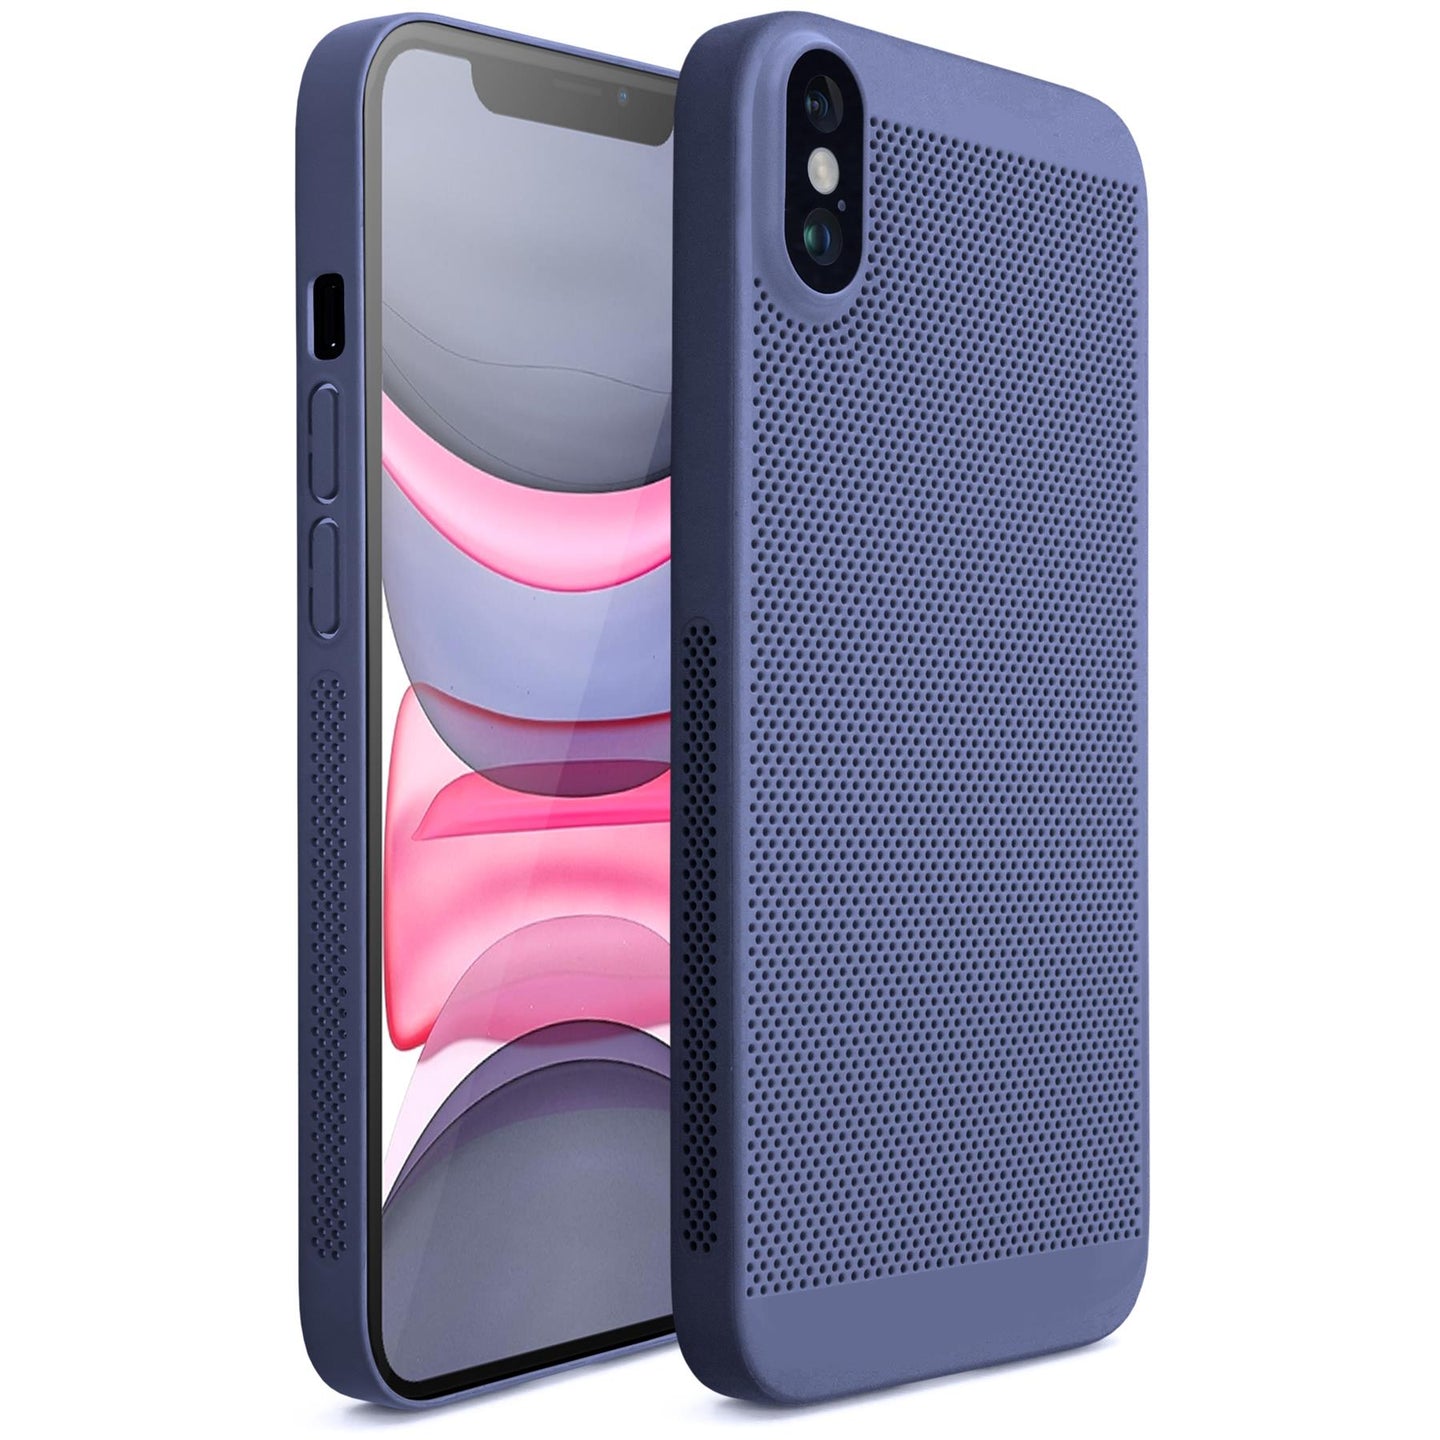 Moozy VentiGuard Phone Case for iPhone X / XS, Blue, 5.8-inch - Breathable Cover with Perforated Pattern for Air Circulation, Ventilation, Anti-Overheating Phone Case